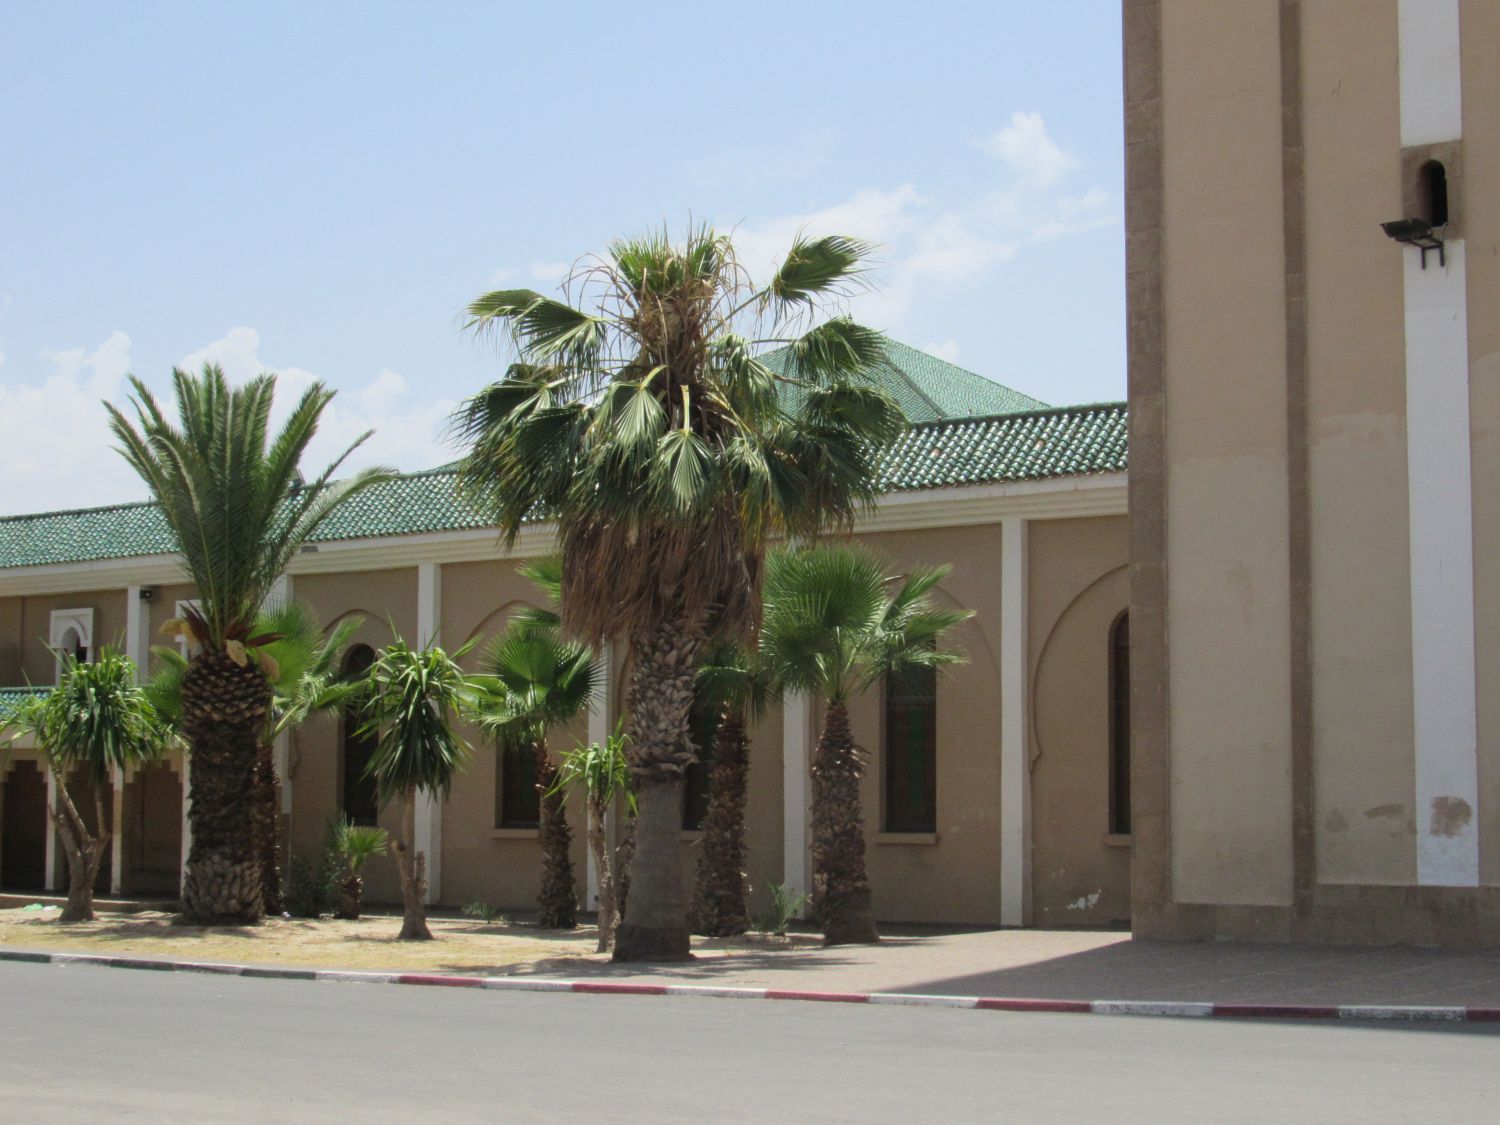 Exterior view of mosque with palm trees in front.